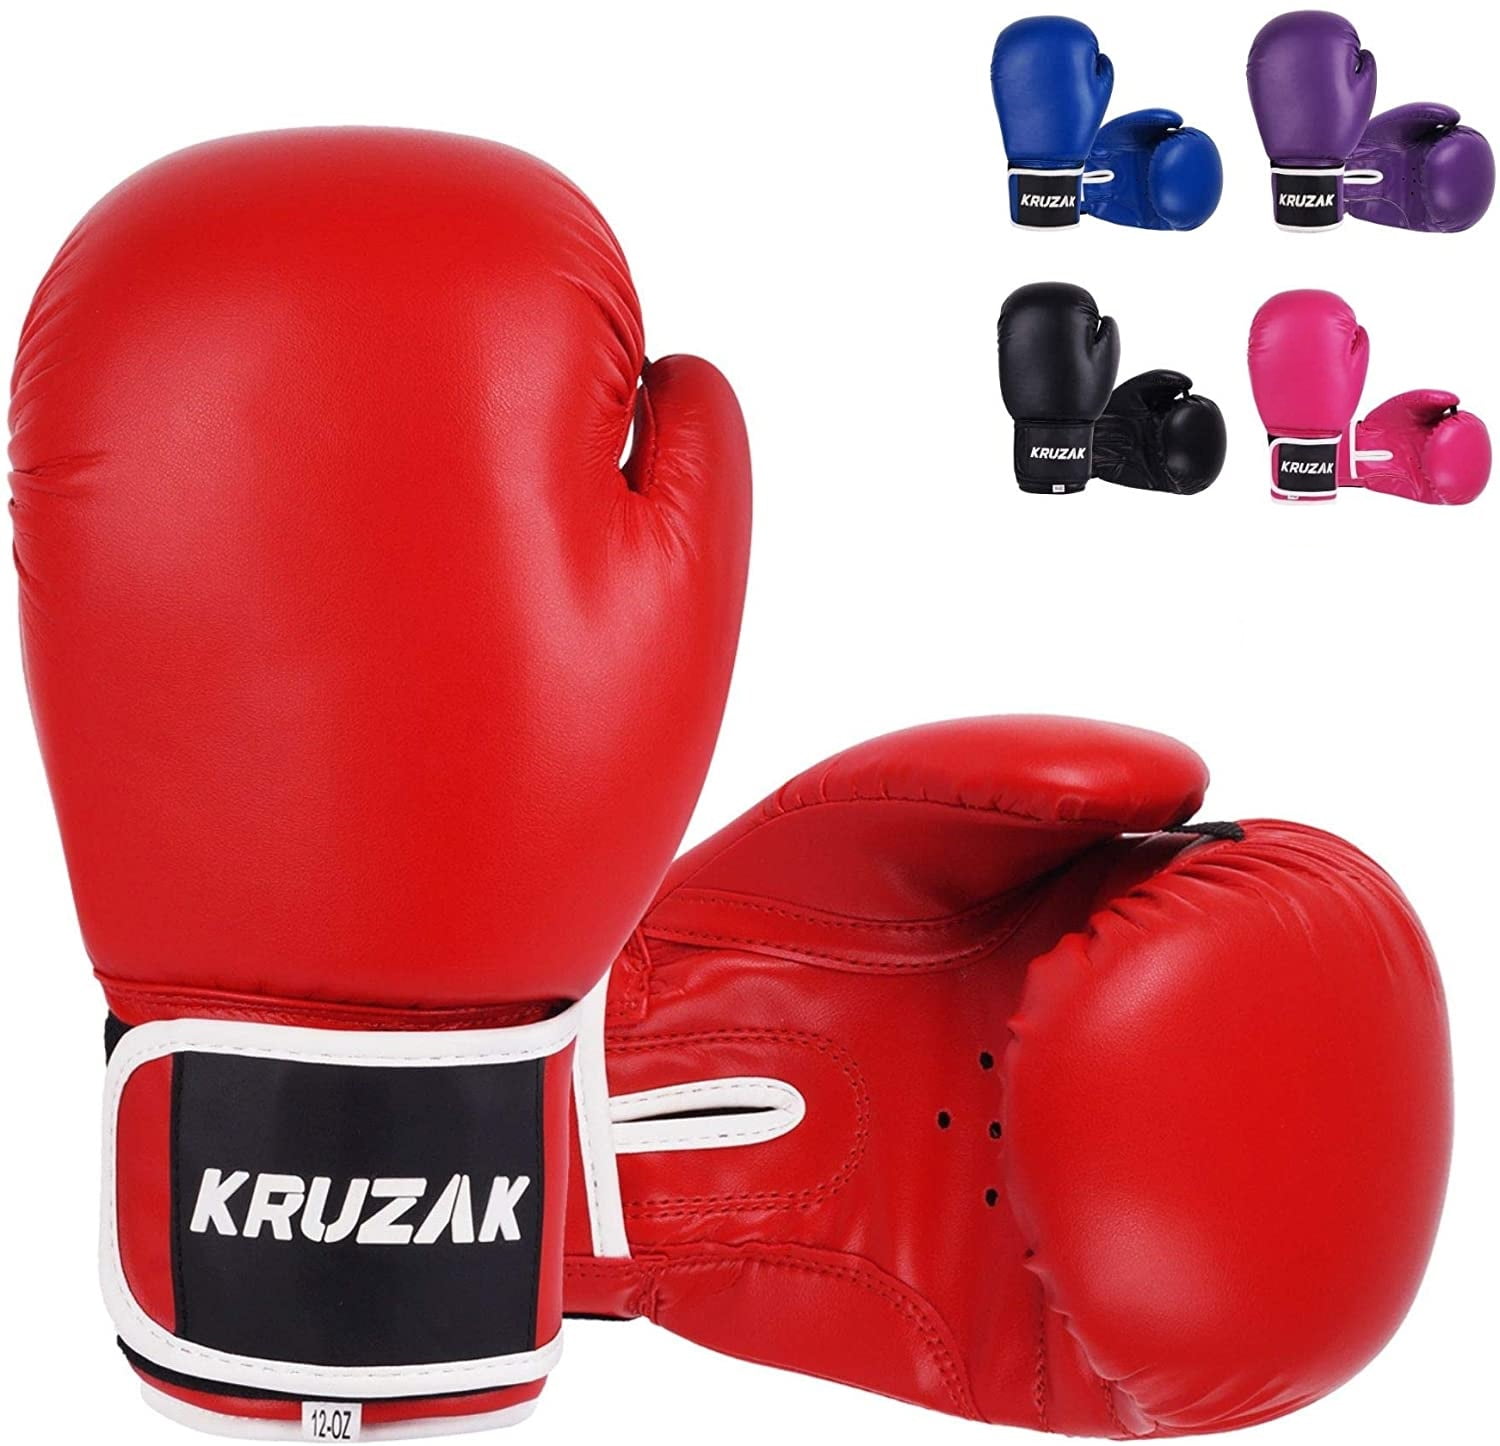 KIDS BOXING GLOVES MACHINE MOLDED FOAM FIGHT PUNCH RED REX LEATHER 06 OZ 